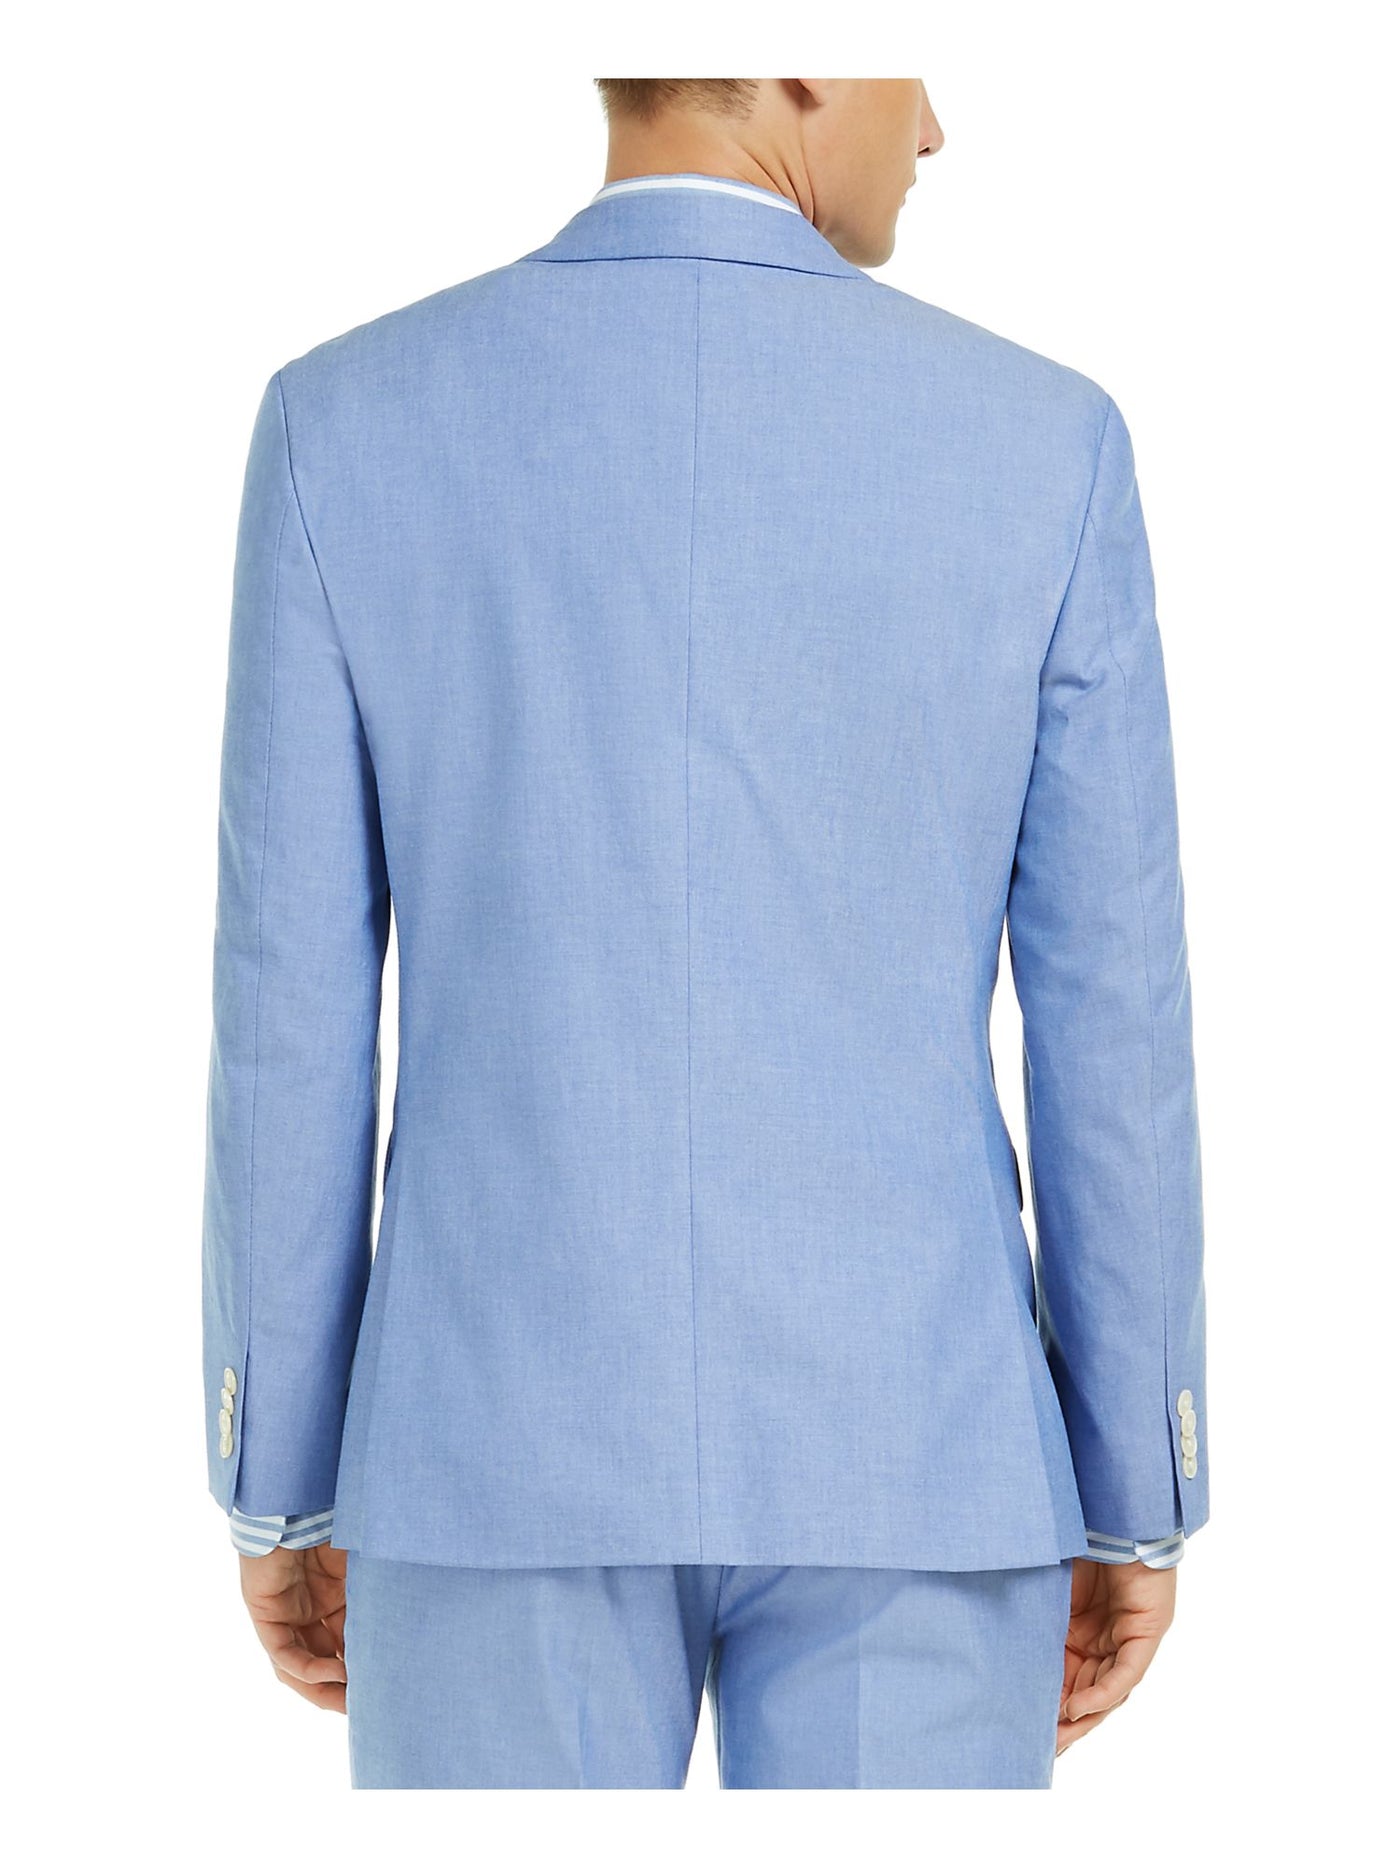 TOMMY HILFIGER Mens Blue  Single Breasted, Stretch, Regular Fit Chambray Suit Separate Blazer Jacket 38R